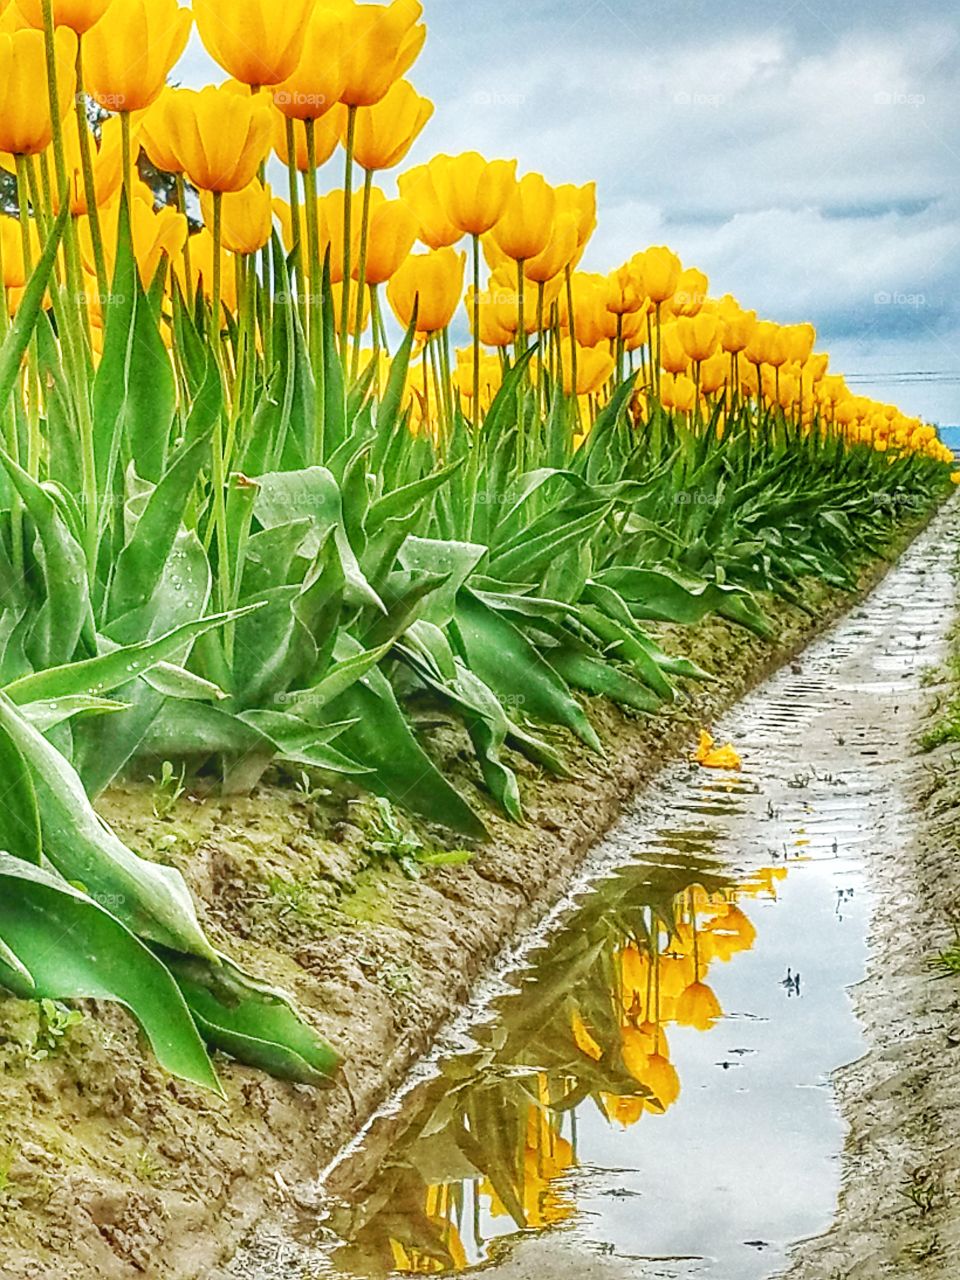 After a rainy day, a row of bold and yellow tulips are reflected on a pool of water off to the side next to it.